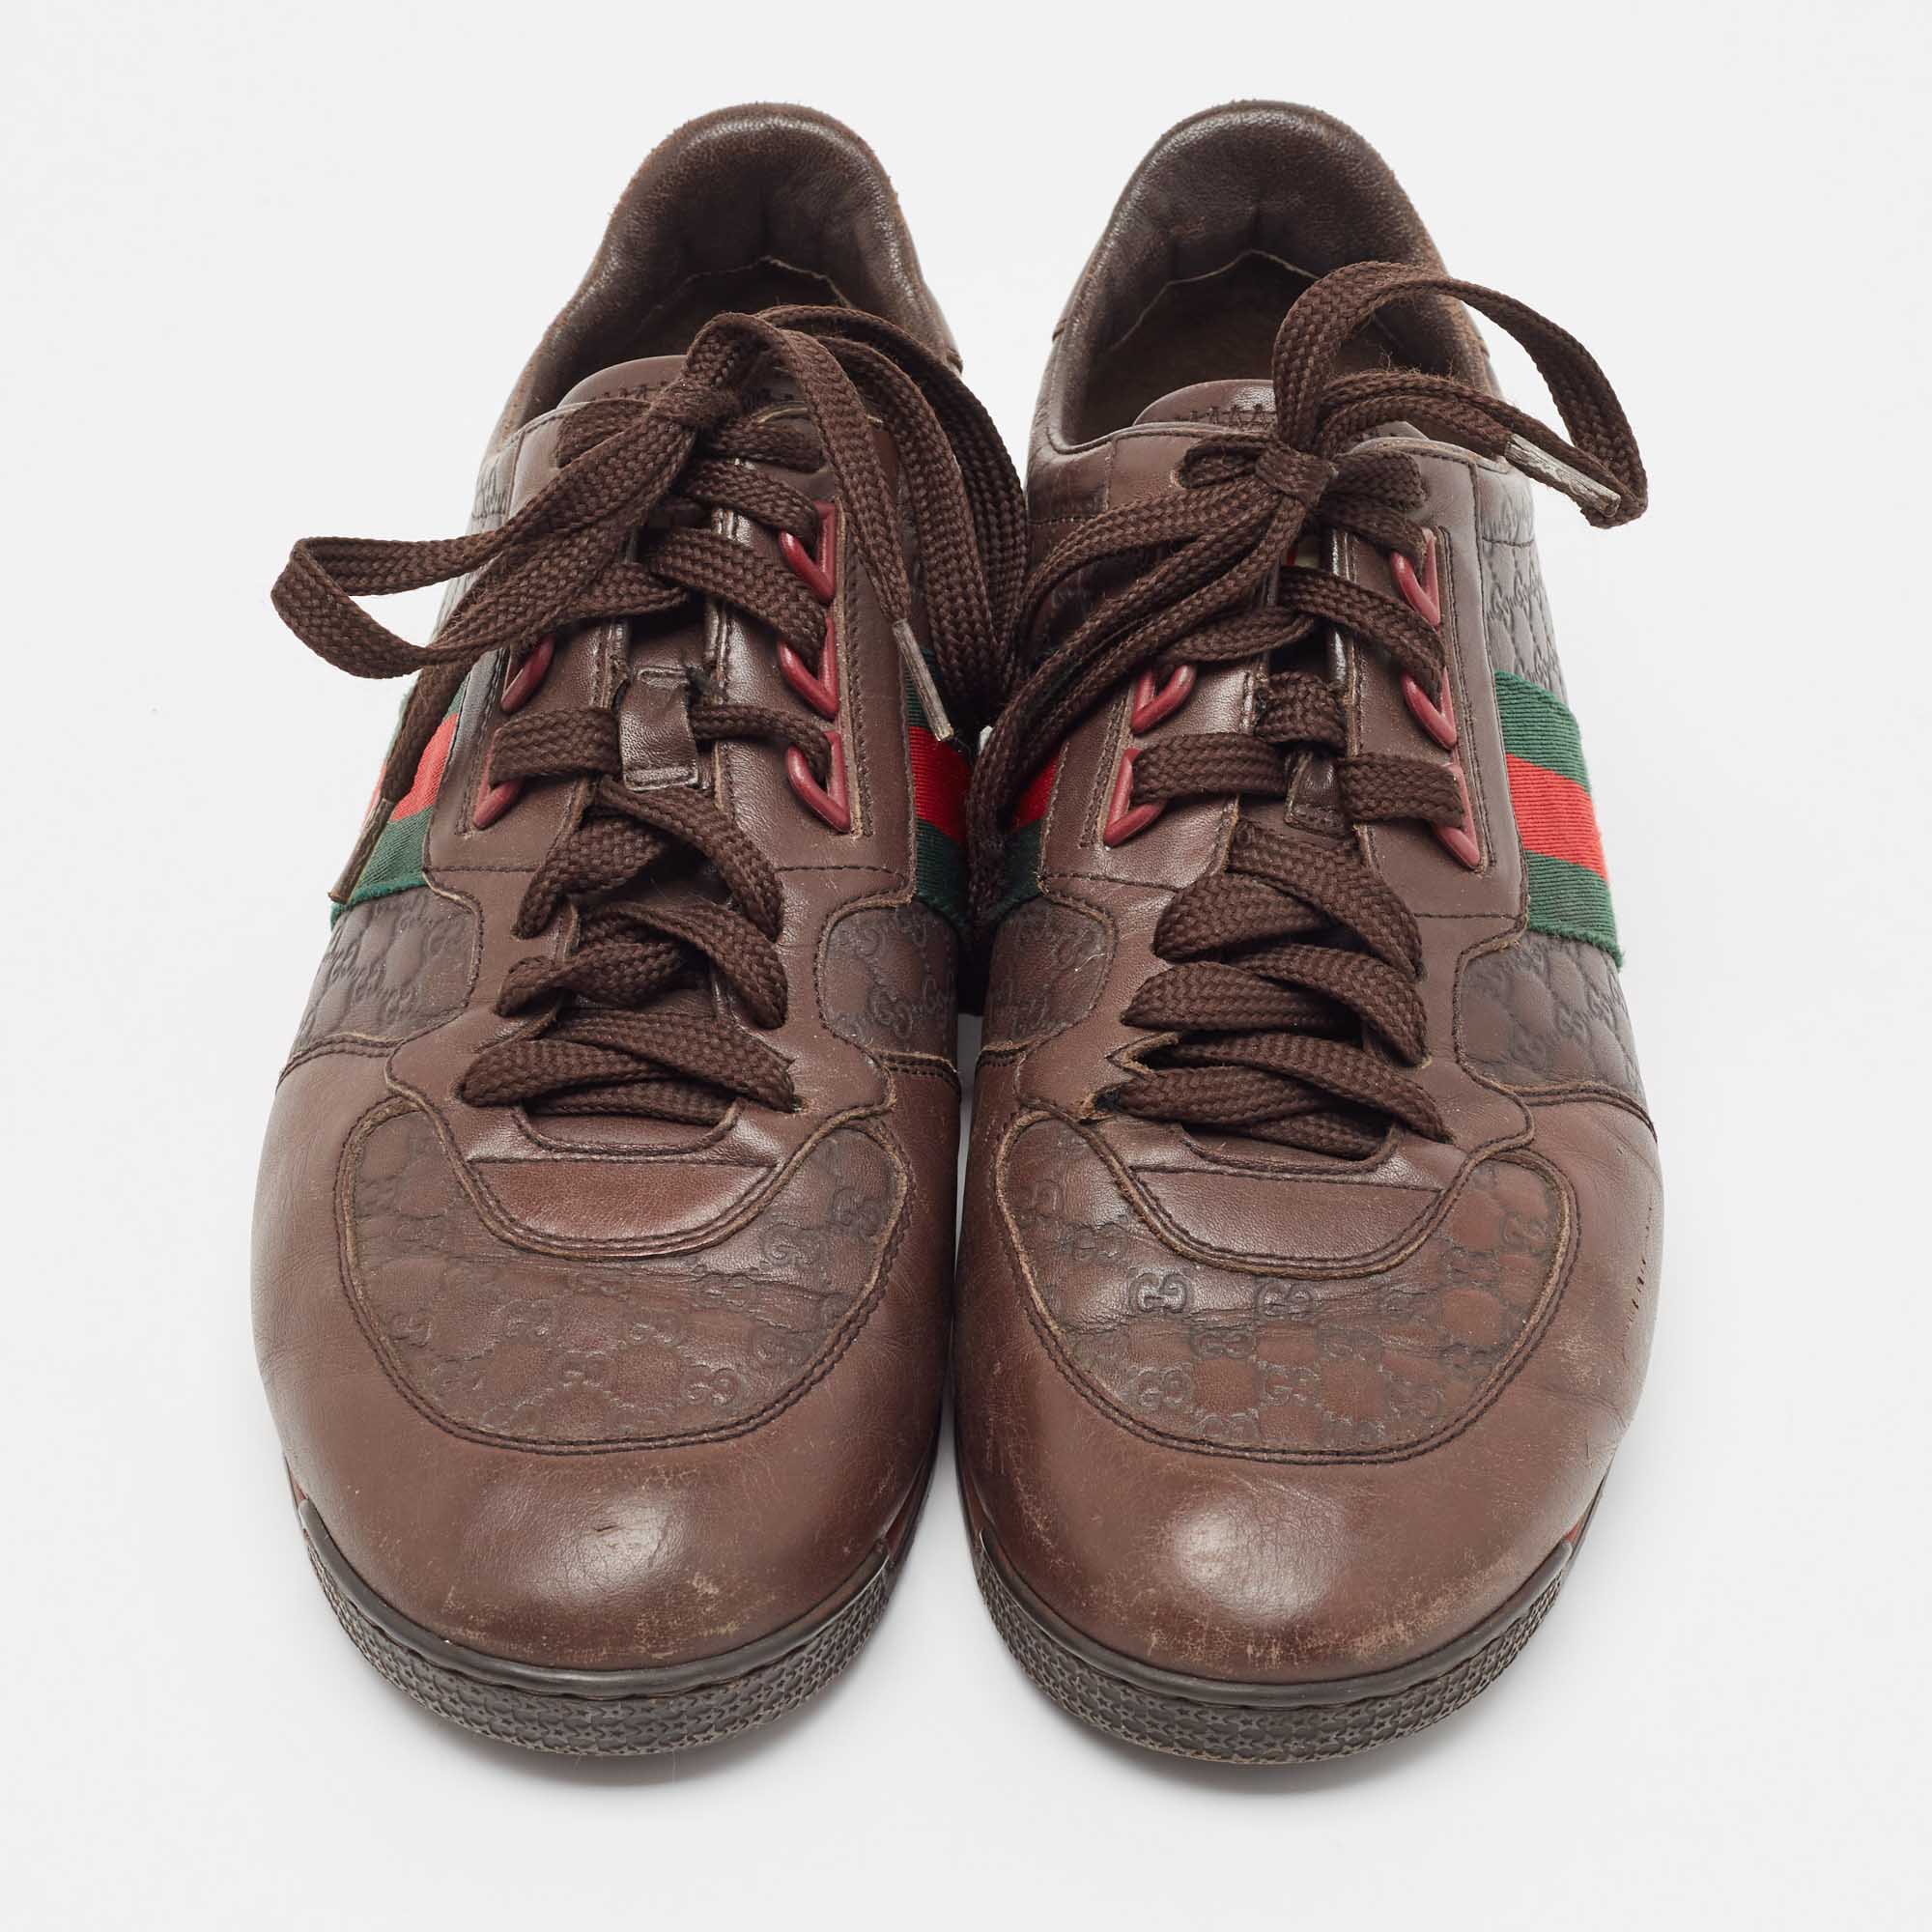 Gucci Brown Microguccissima Leather Web Low Top Sneakers Size 41.5